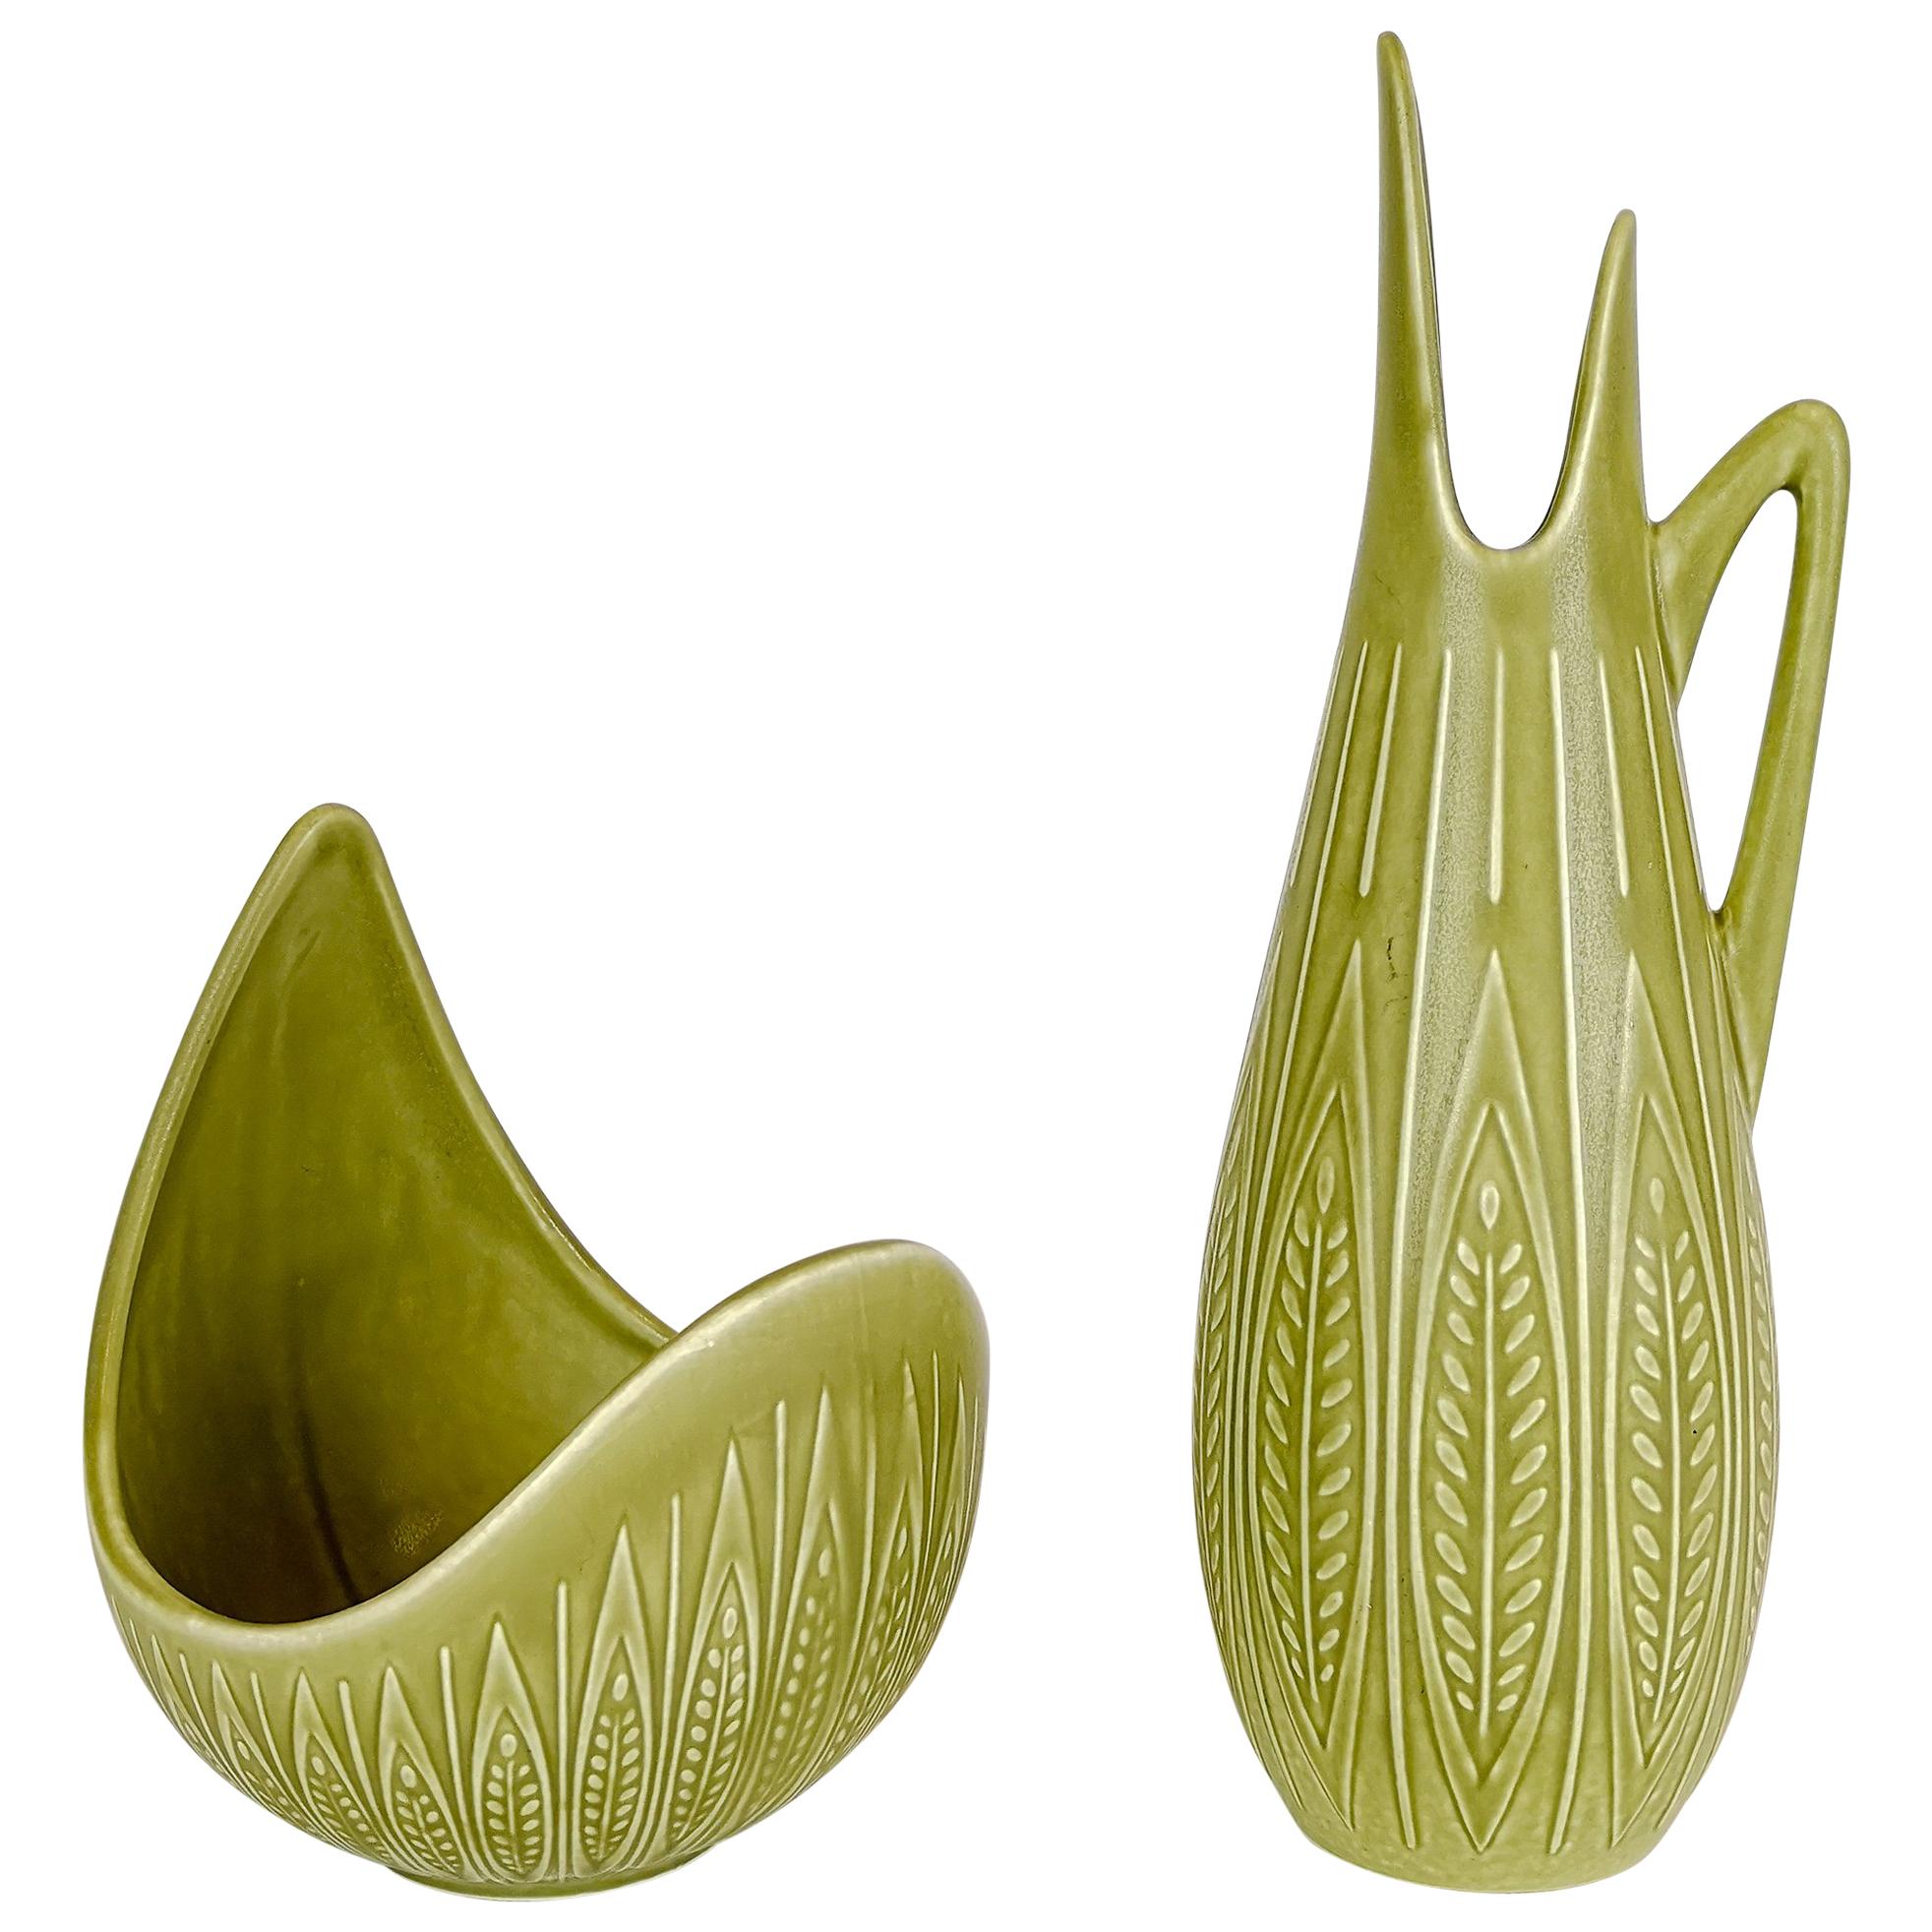 Midcentury Modern Ceramic Bowl and Vase "Rialto" by Gunnar Nylund for Rörstrand For Sale